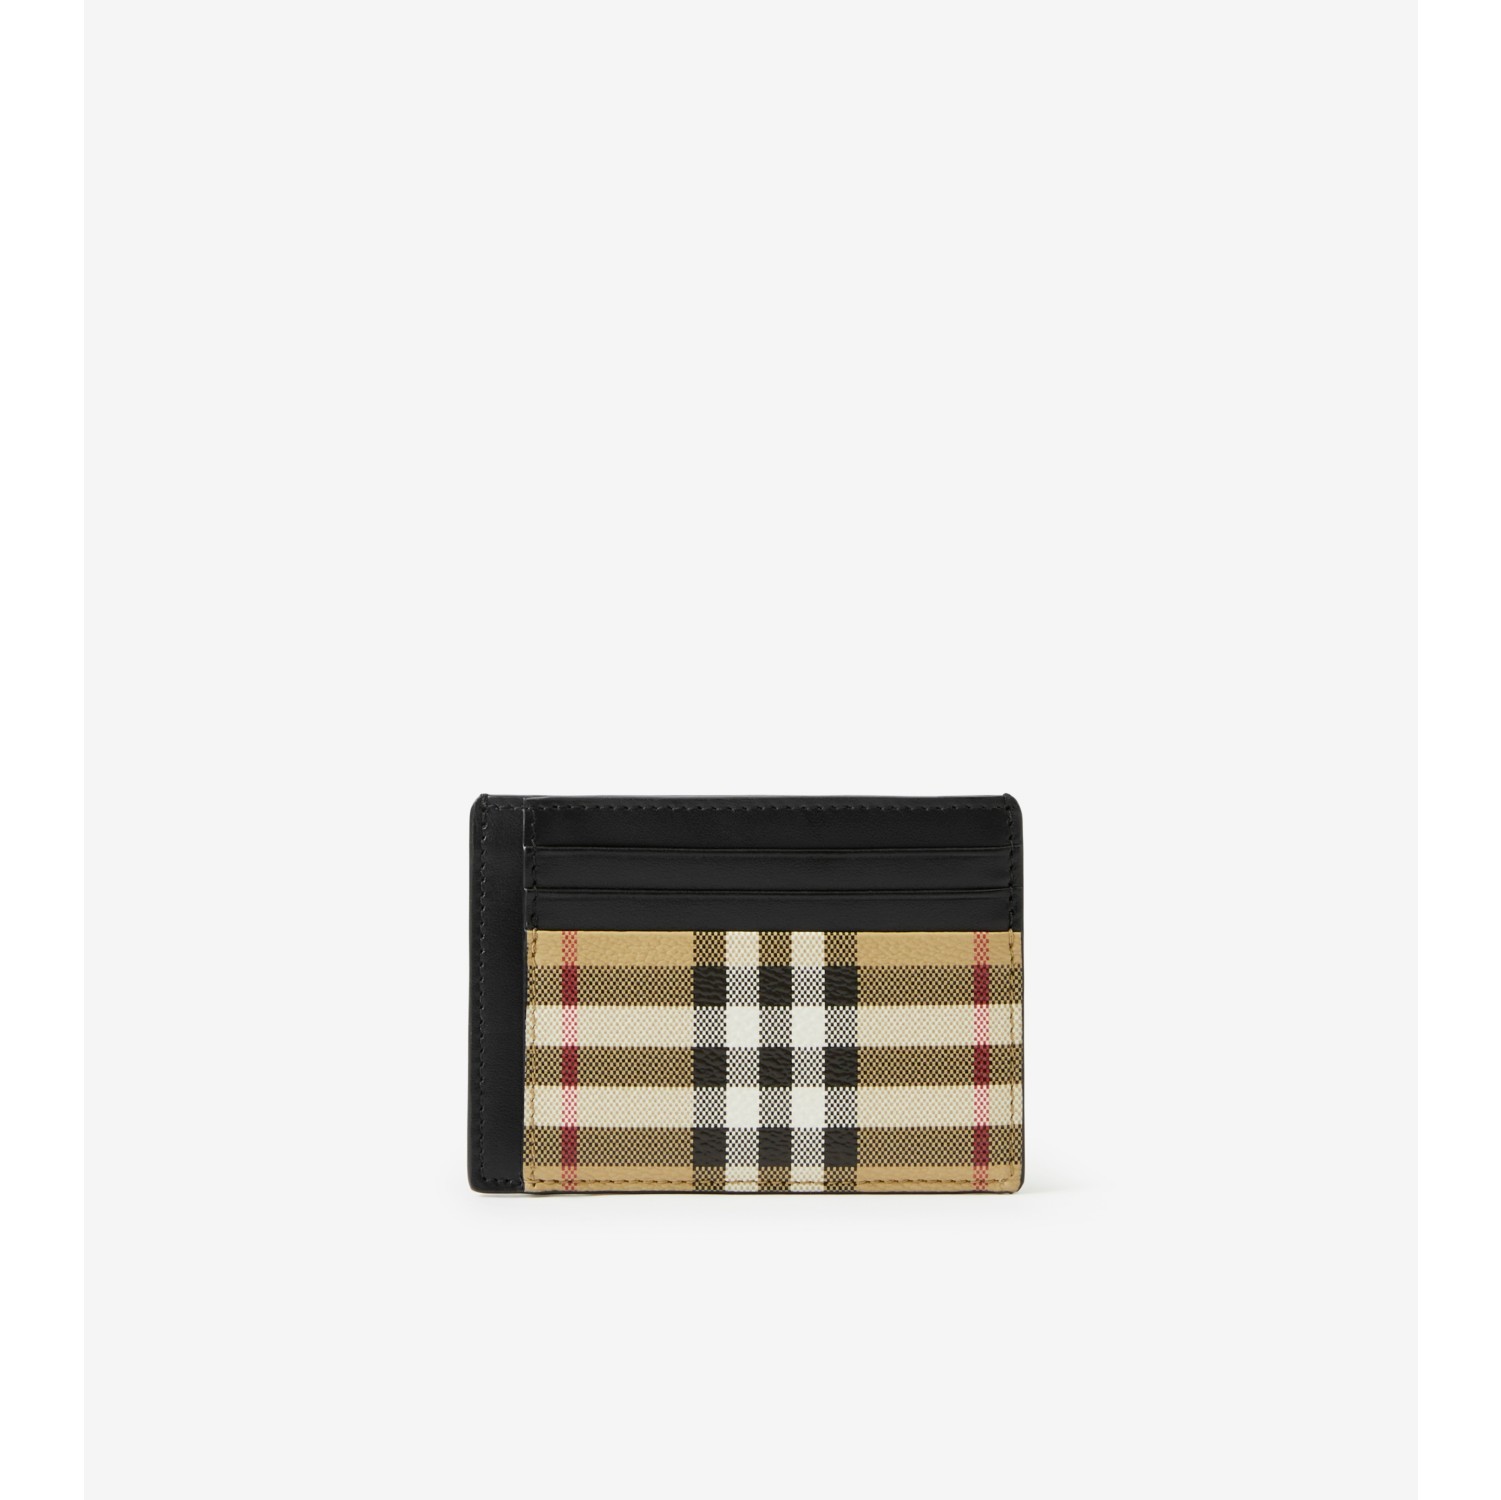 Burberry Check Leather-Trimmed Money Clip Card Holder